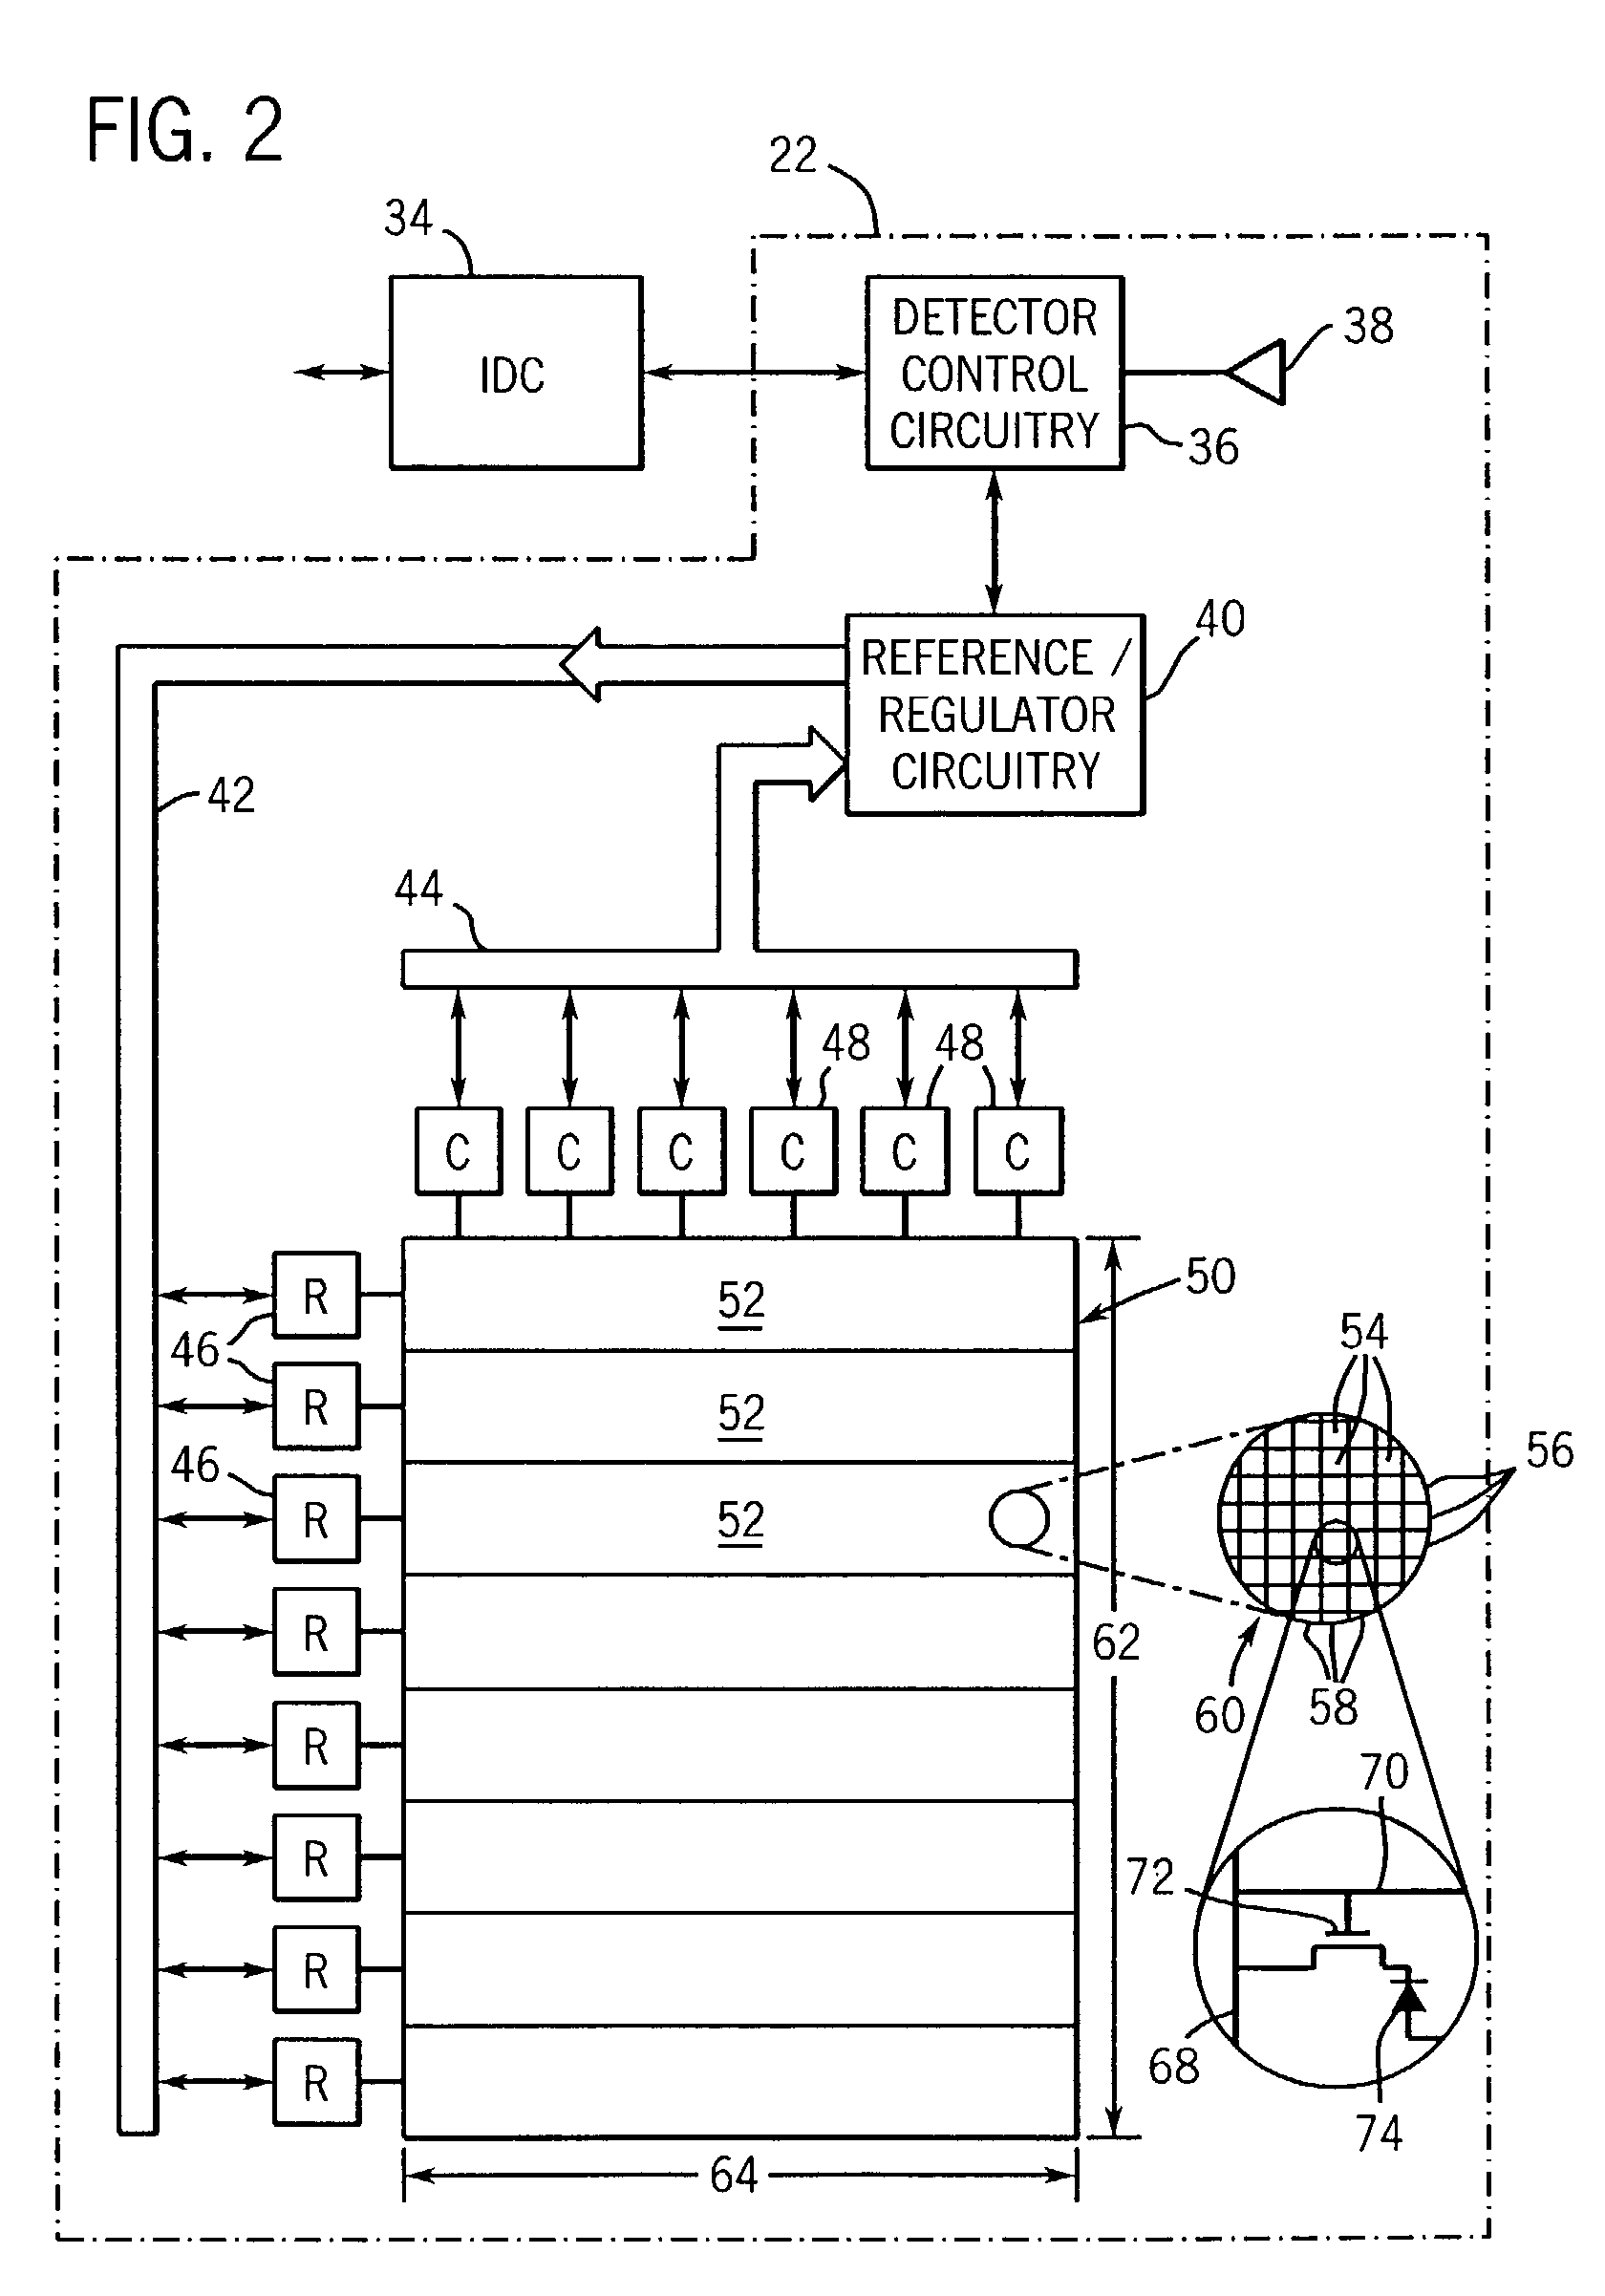 System and method for efficiently customizing an imaging system